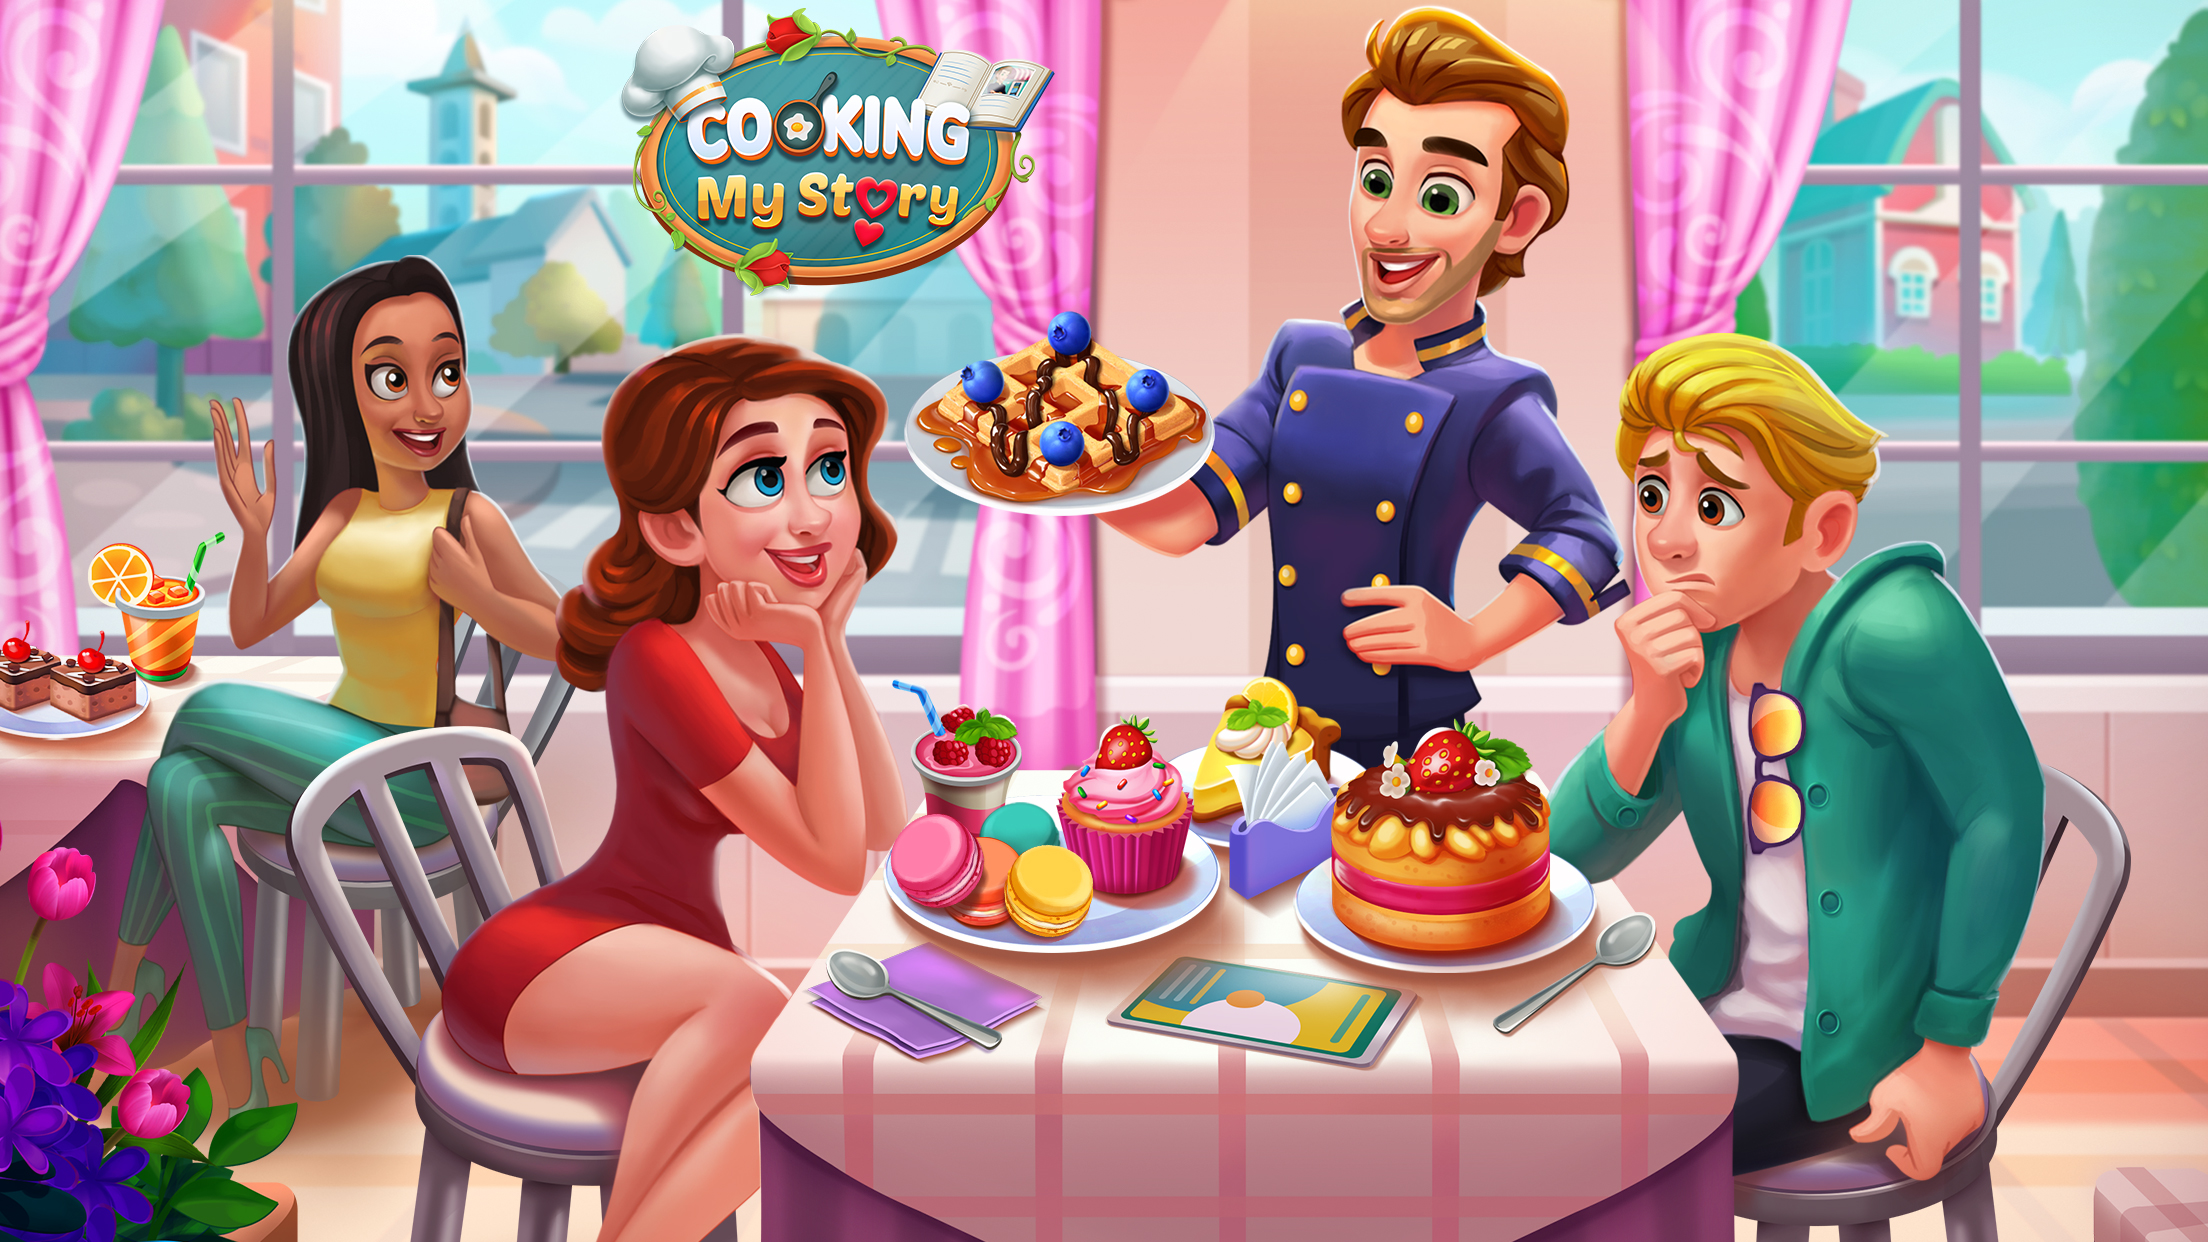 Play game story. My Cooking игра. Cooking stories игра. Еда в играх. Игра Cooking Diary на ПК.